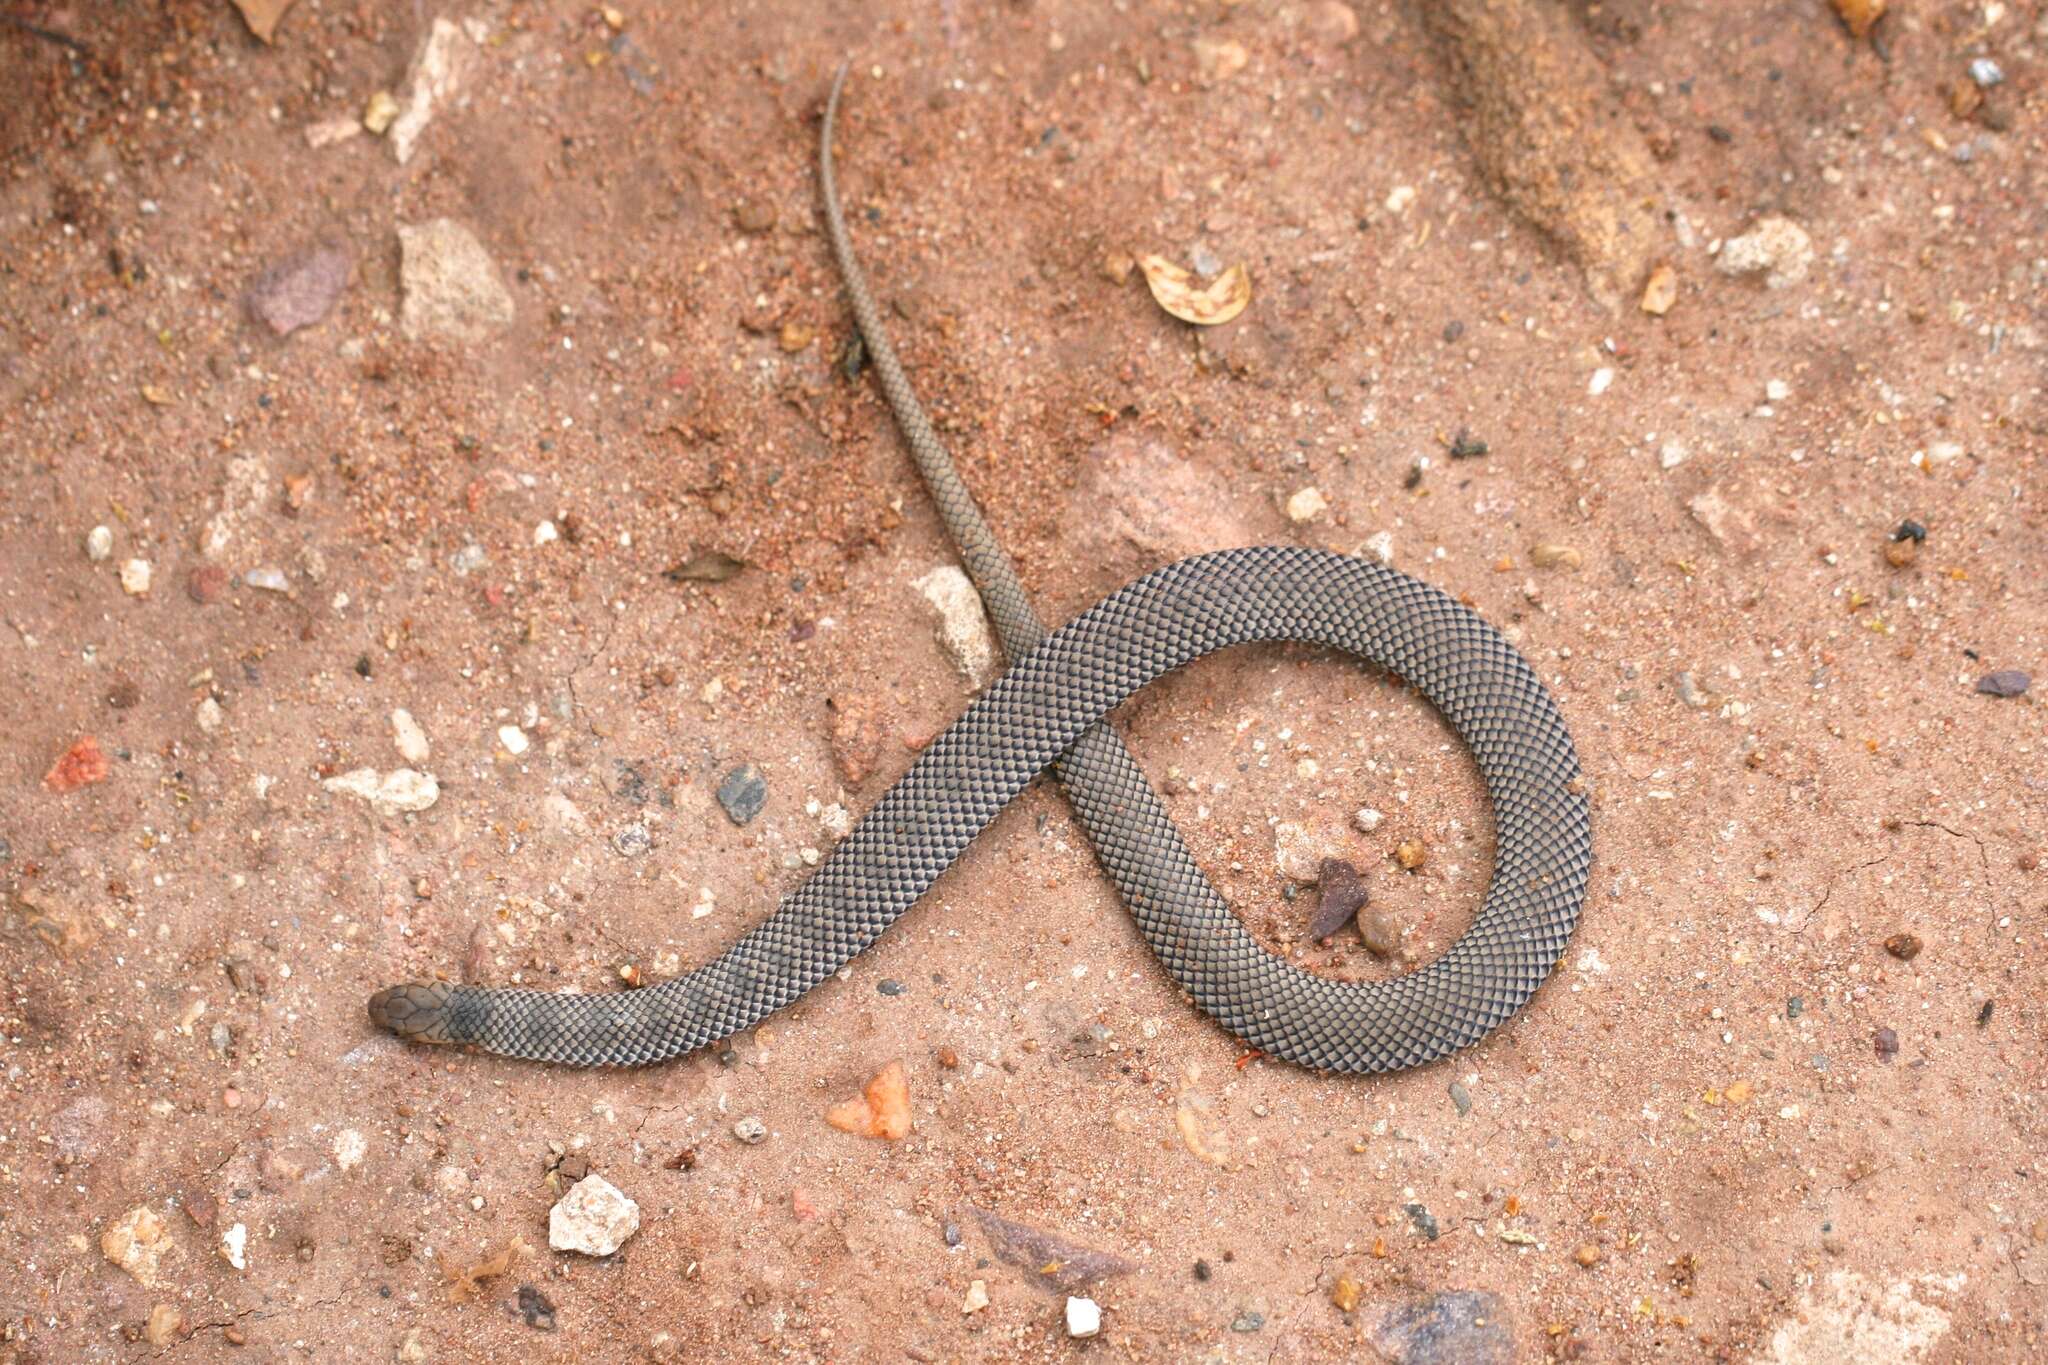 Image of Plumbeous or Reticulated Centipede Eater